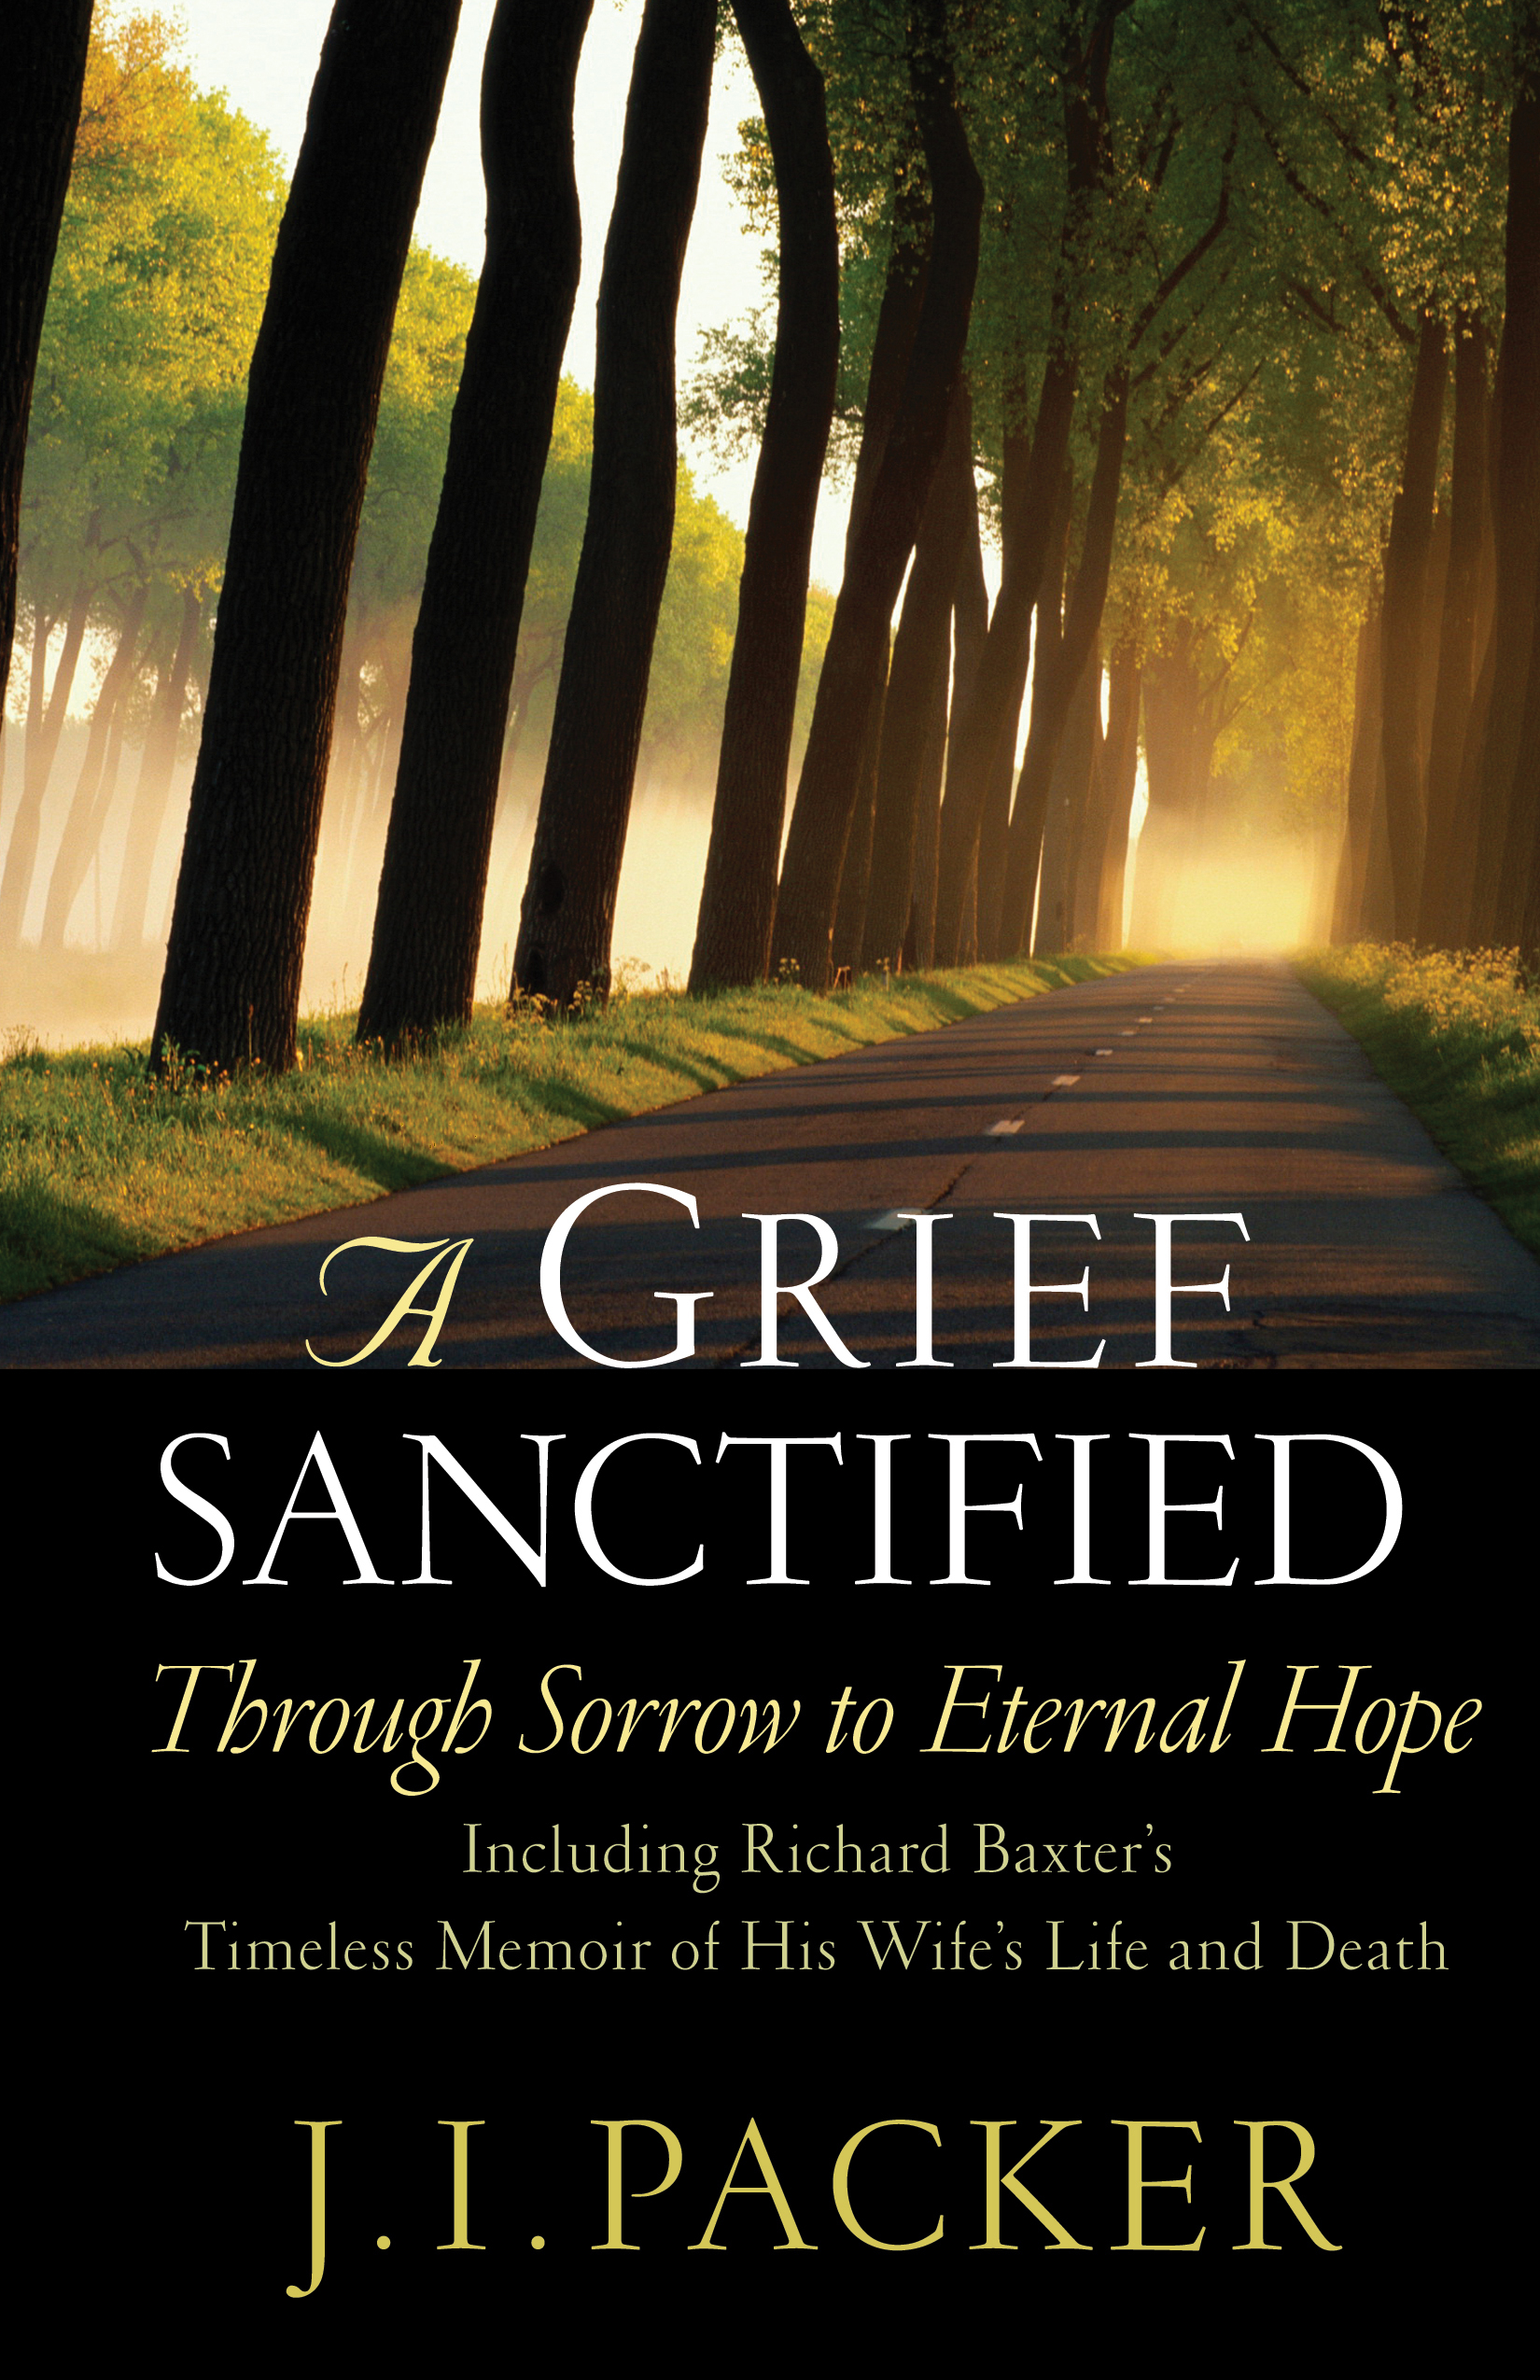 A Grief Sanctified (Including Richard Baxter's Timeless Memoir of His